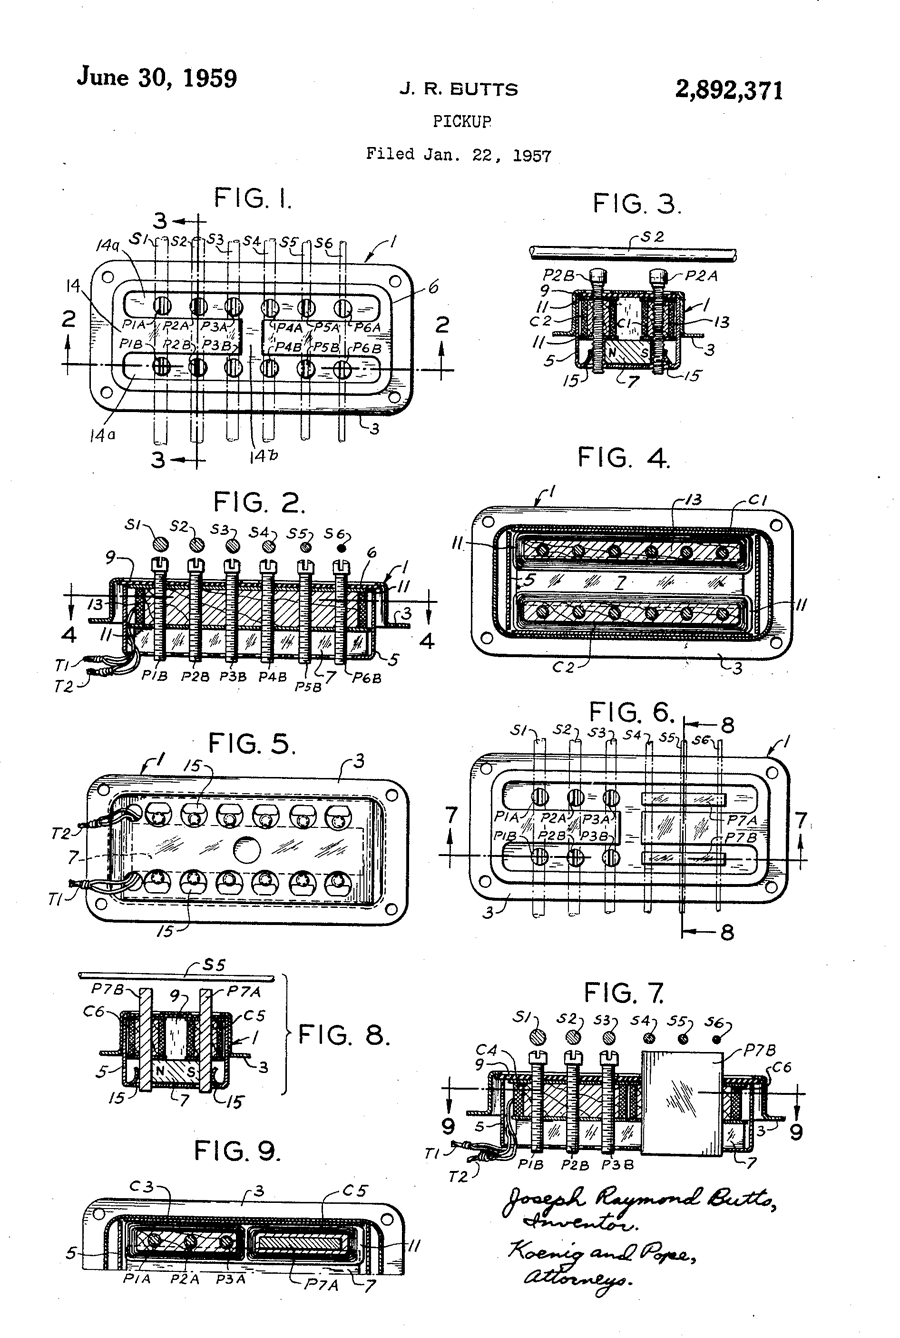 Patent of Ray Butts Filter'Tron: filed January 22, 1957, approved June 30, 1959